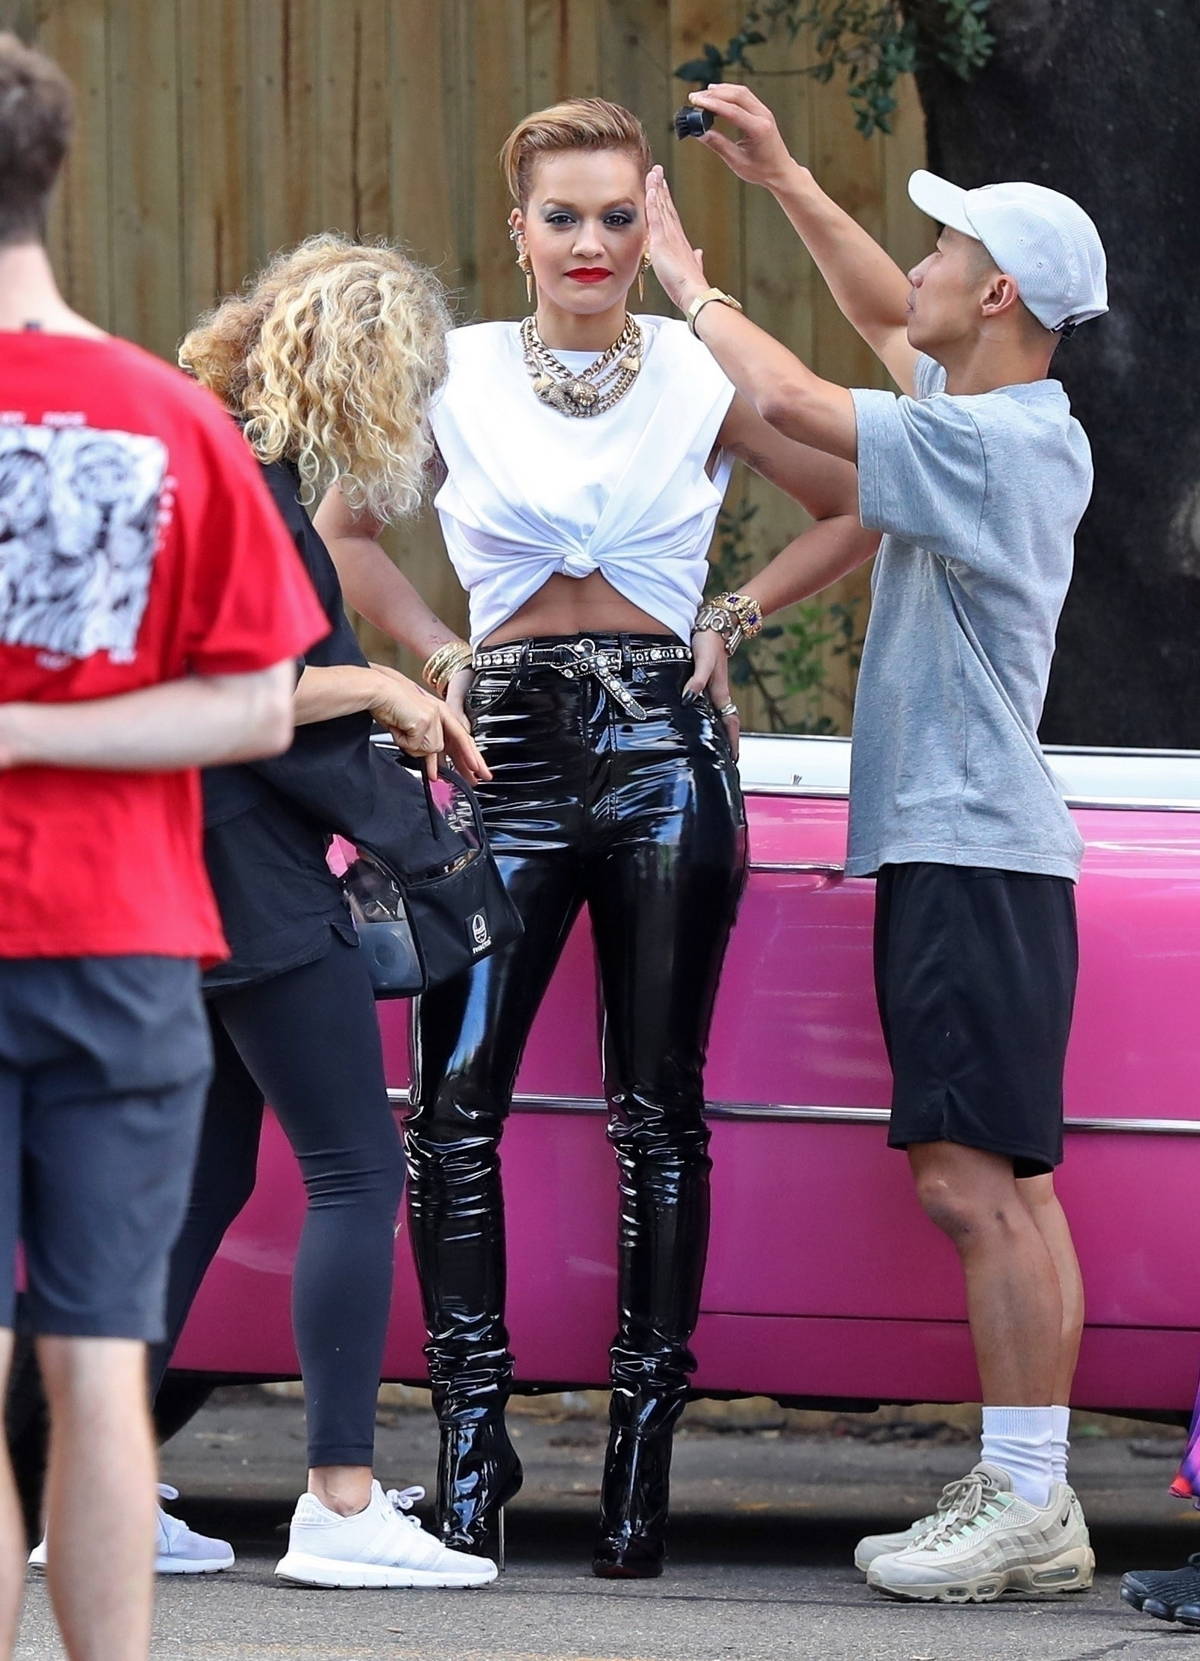 https://www.celebsfirst.com/wp-content/uploads/2021/03/rita-ora-stuns-in-skin-tight-leather-pants-while-posing-with-a-bright-pink-vintage-car-for-a-photoshoot-in-sydney-australia-260321_2.jpg